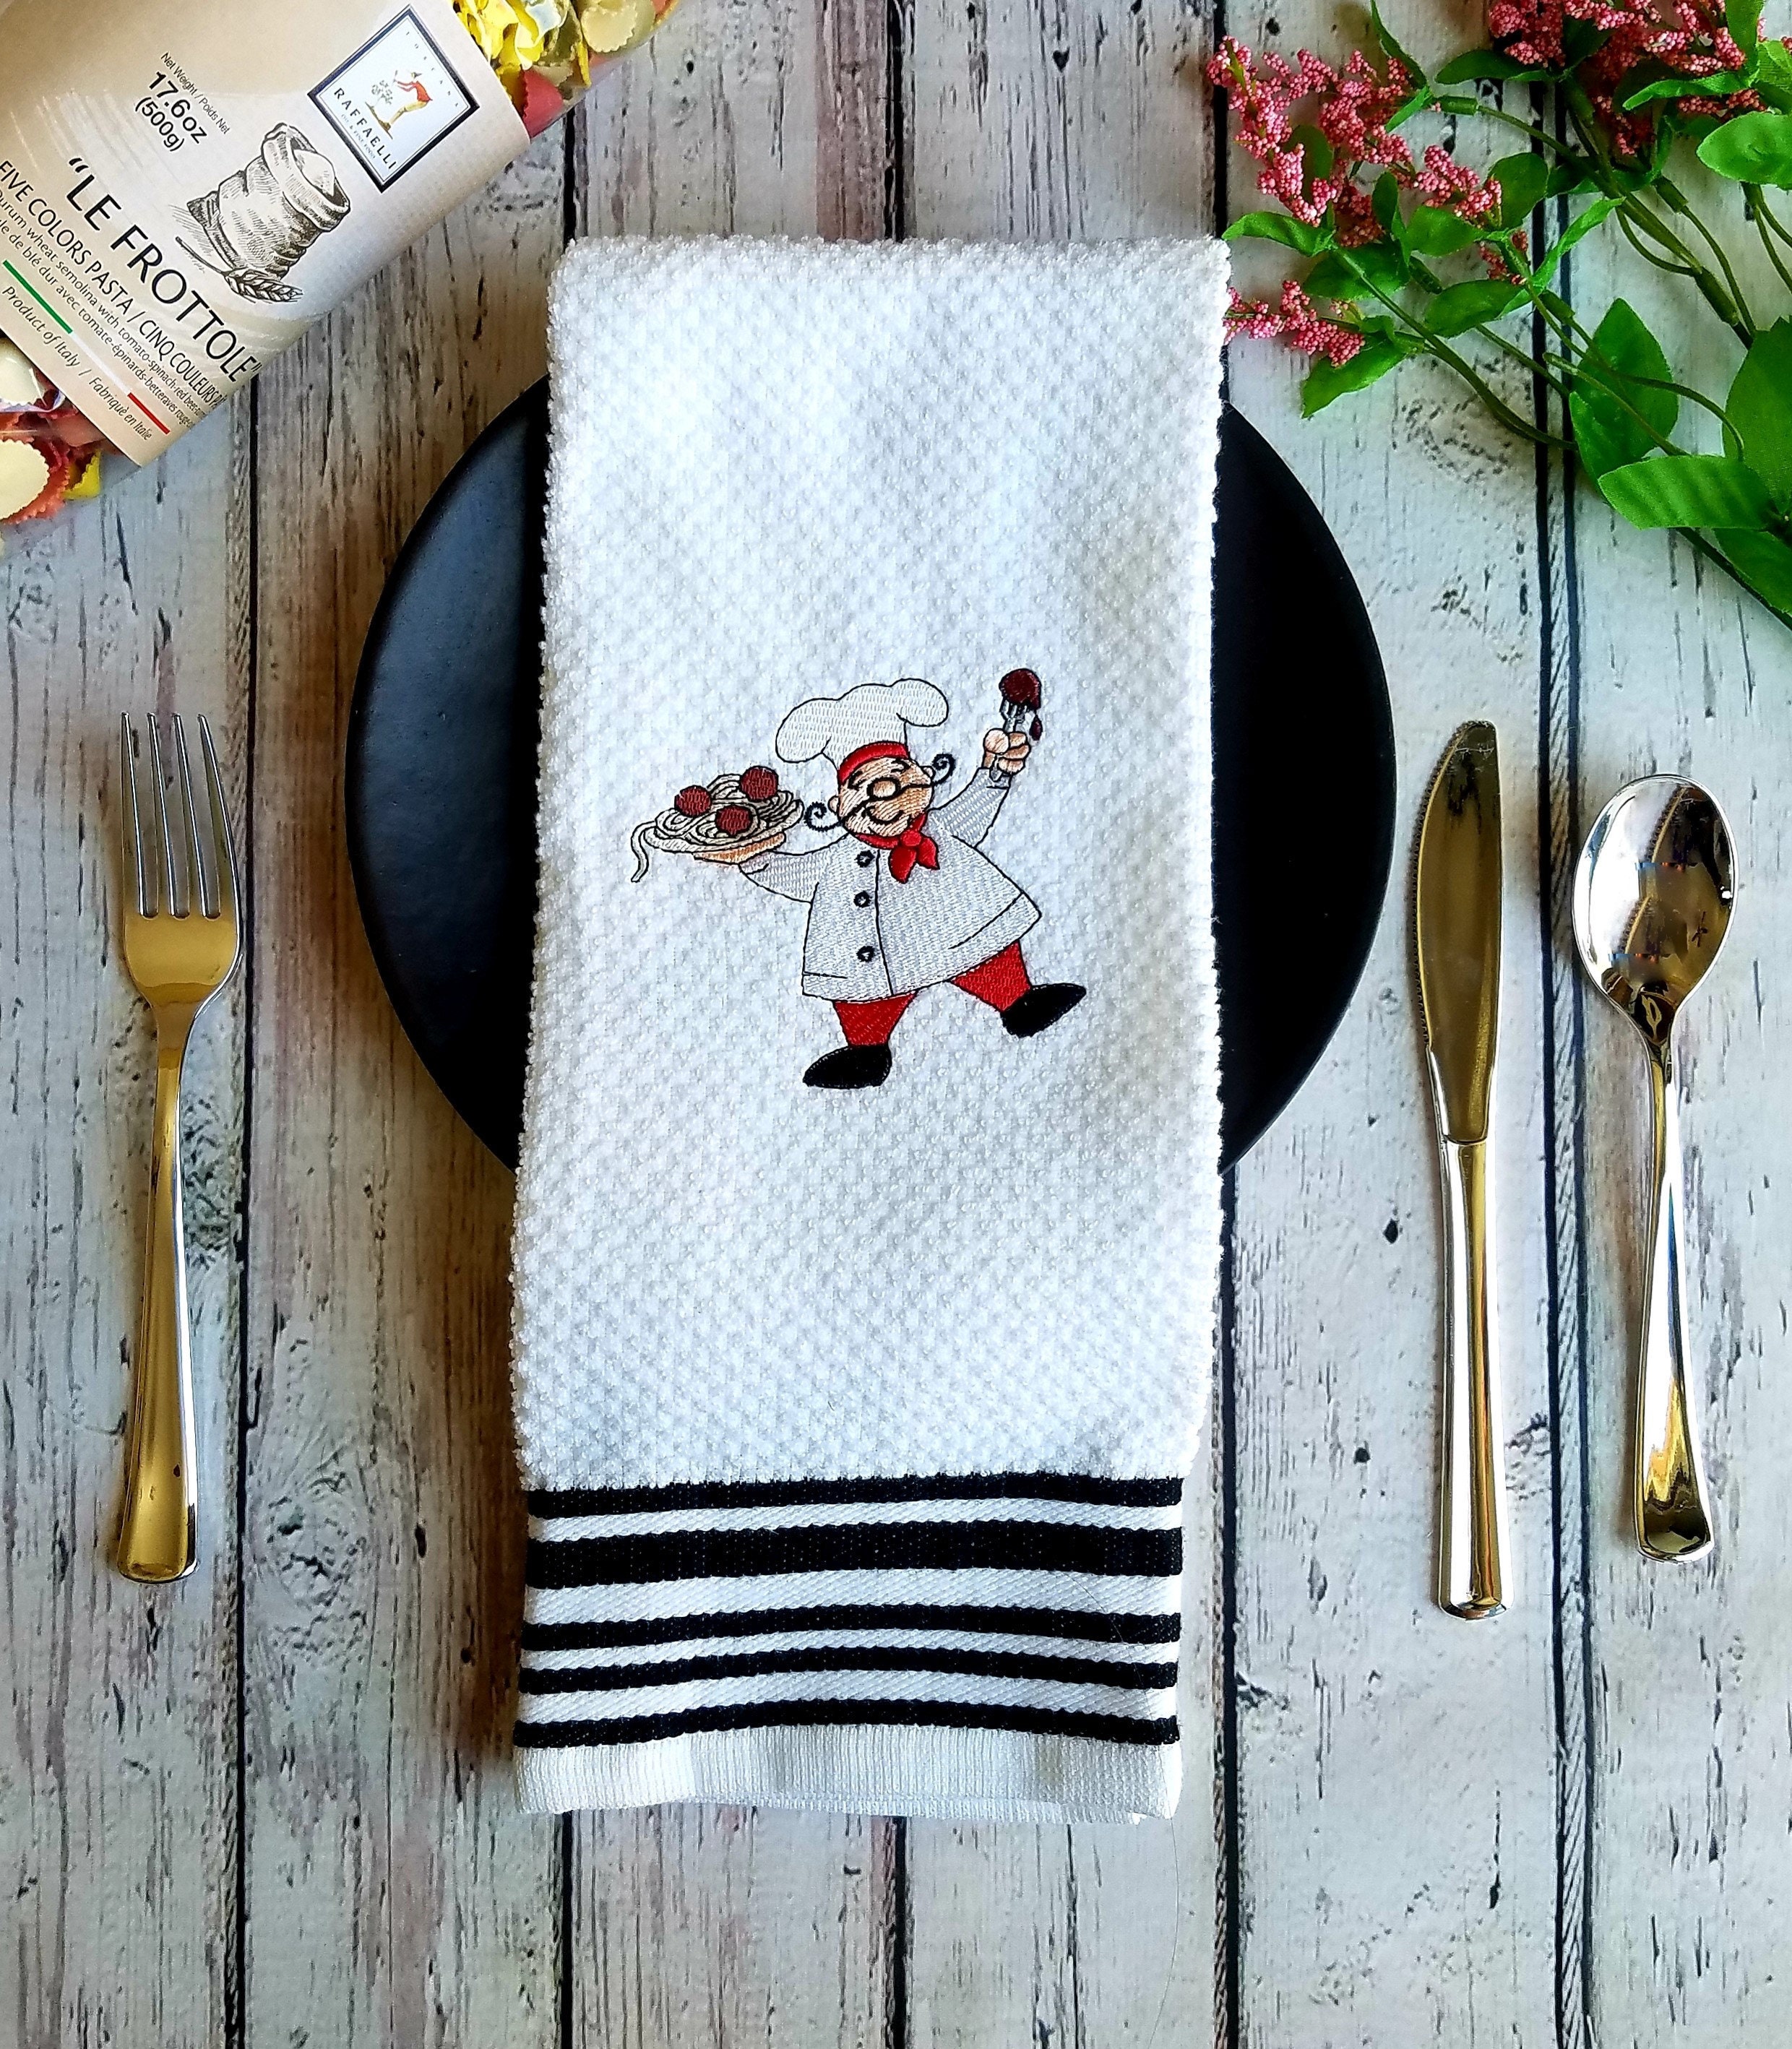 Where to Buy Cute Kitchen Towels - The Inspired Room